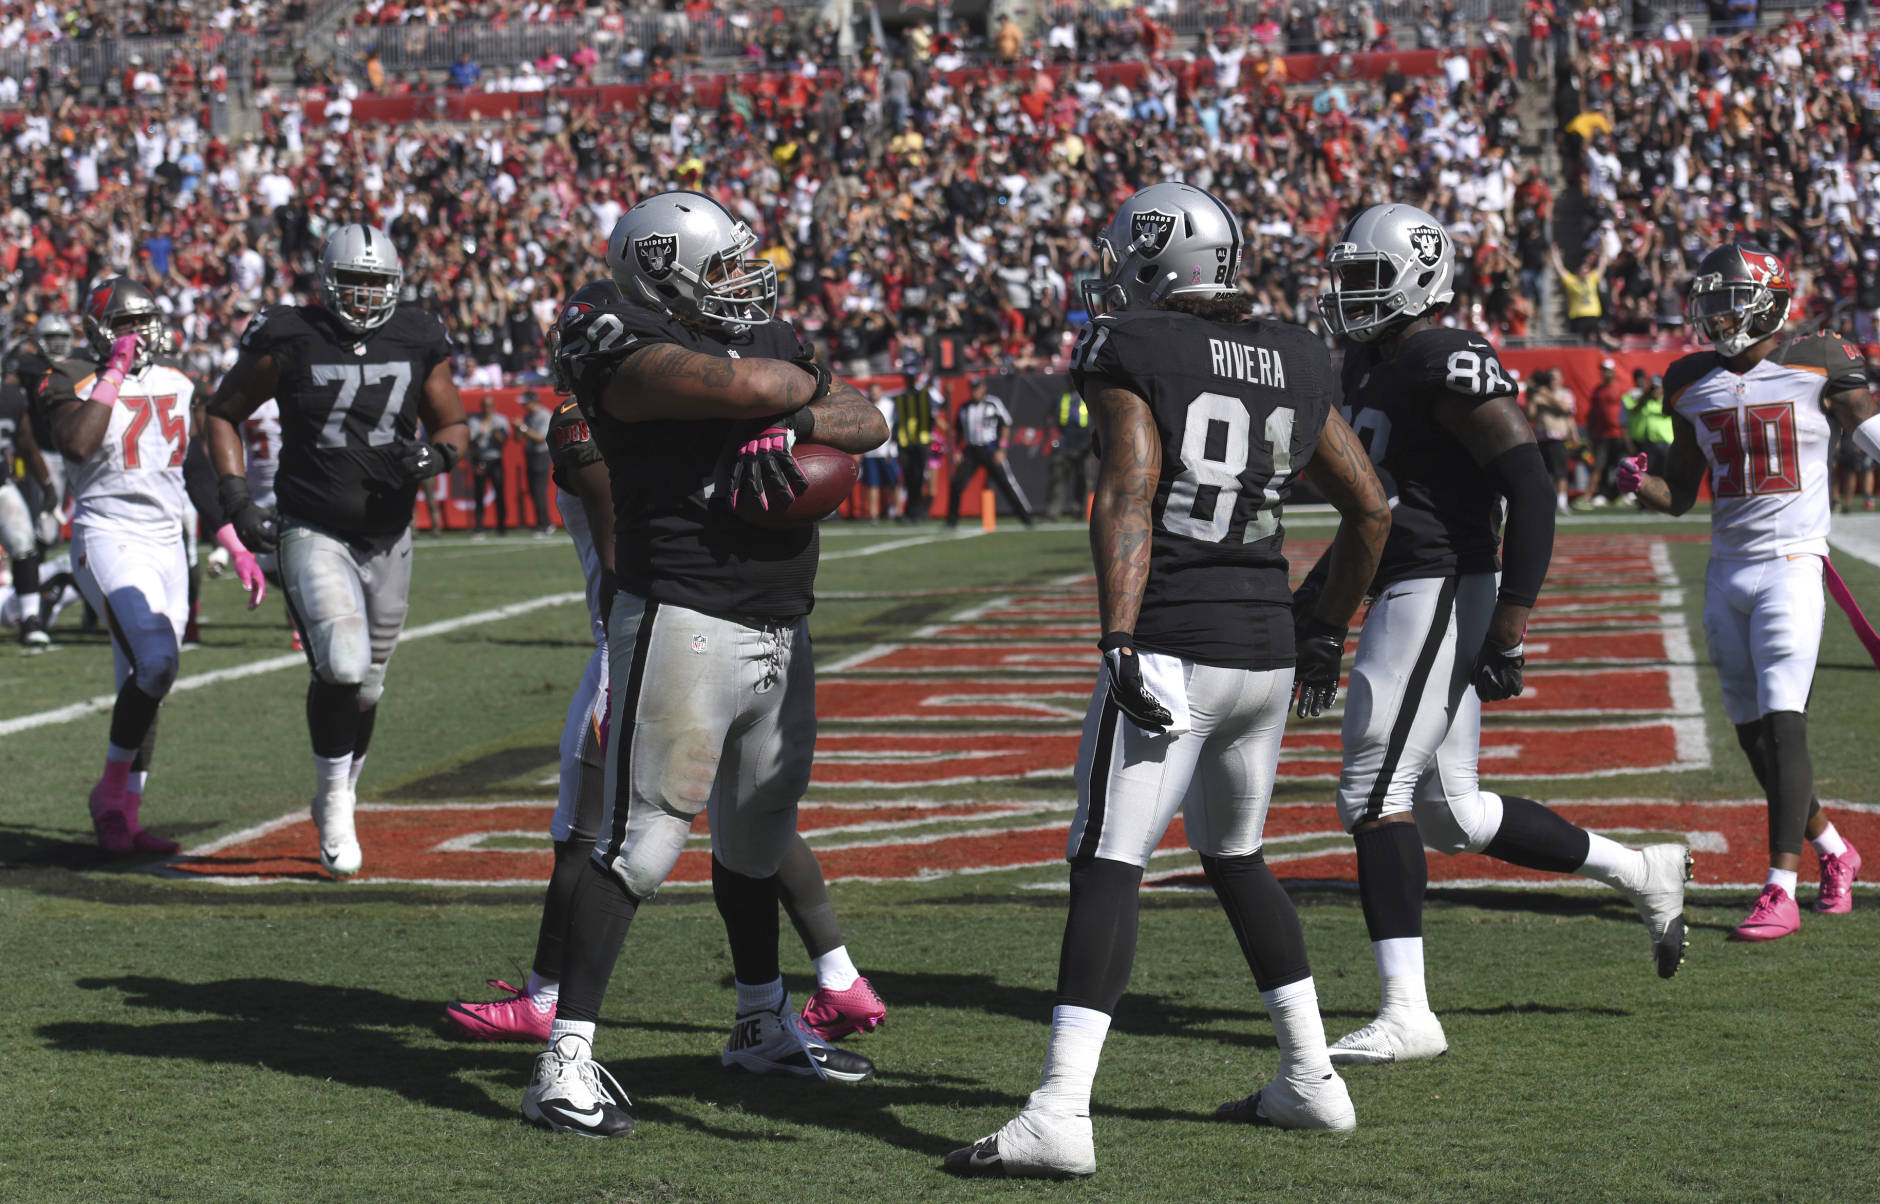 Oakland Raiders tackle Donald Penn (72) reacts after catching a 1-yard touchdown pass against the Tampa Bay Buccaneers during the third quarter of an NFL football game Sunday, Oct. 30, 2016, in Tampa, Fla. (AP Photo/Jason Behnken)